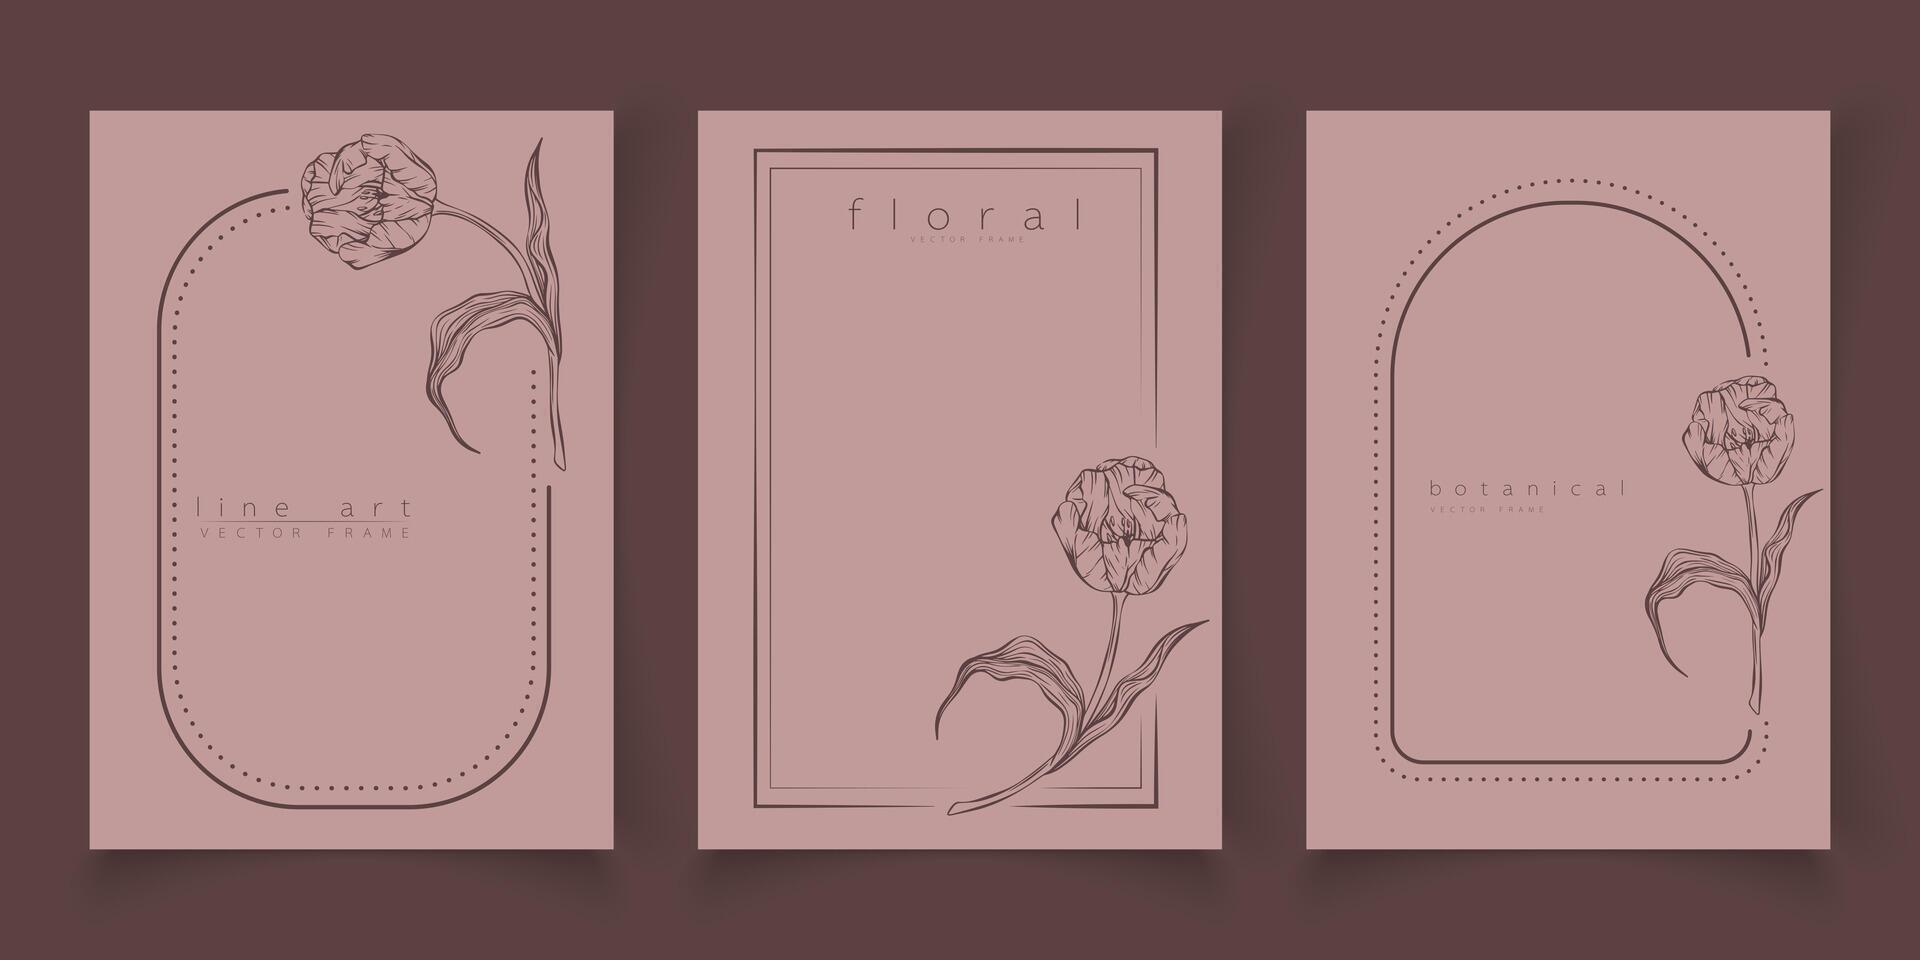 Set of frame templates in minimal linear style with hand drawn tulips. Elegant floral tulip line art border for for labels, corporate identity, wedding invitation, logo, save the date, beauty industry vector